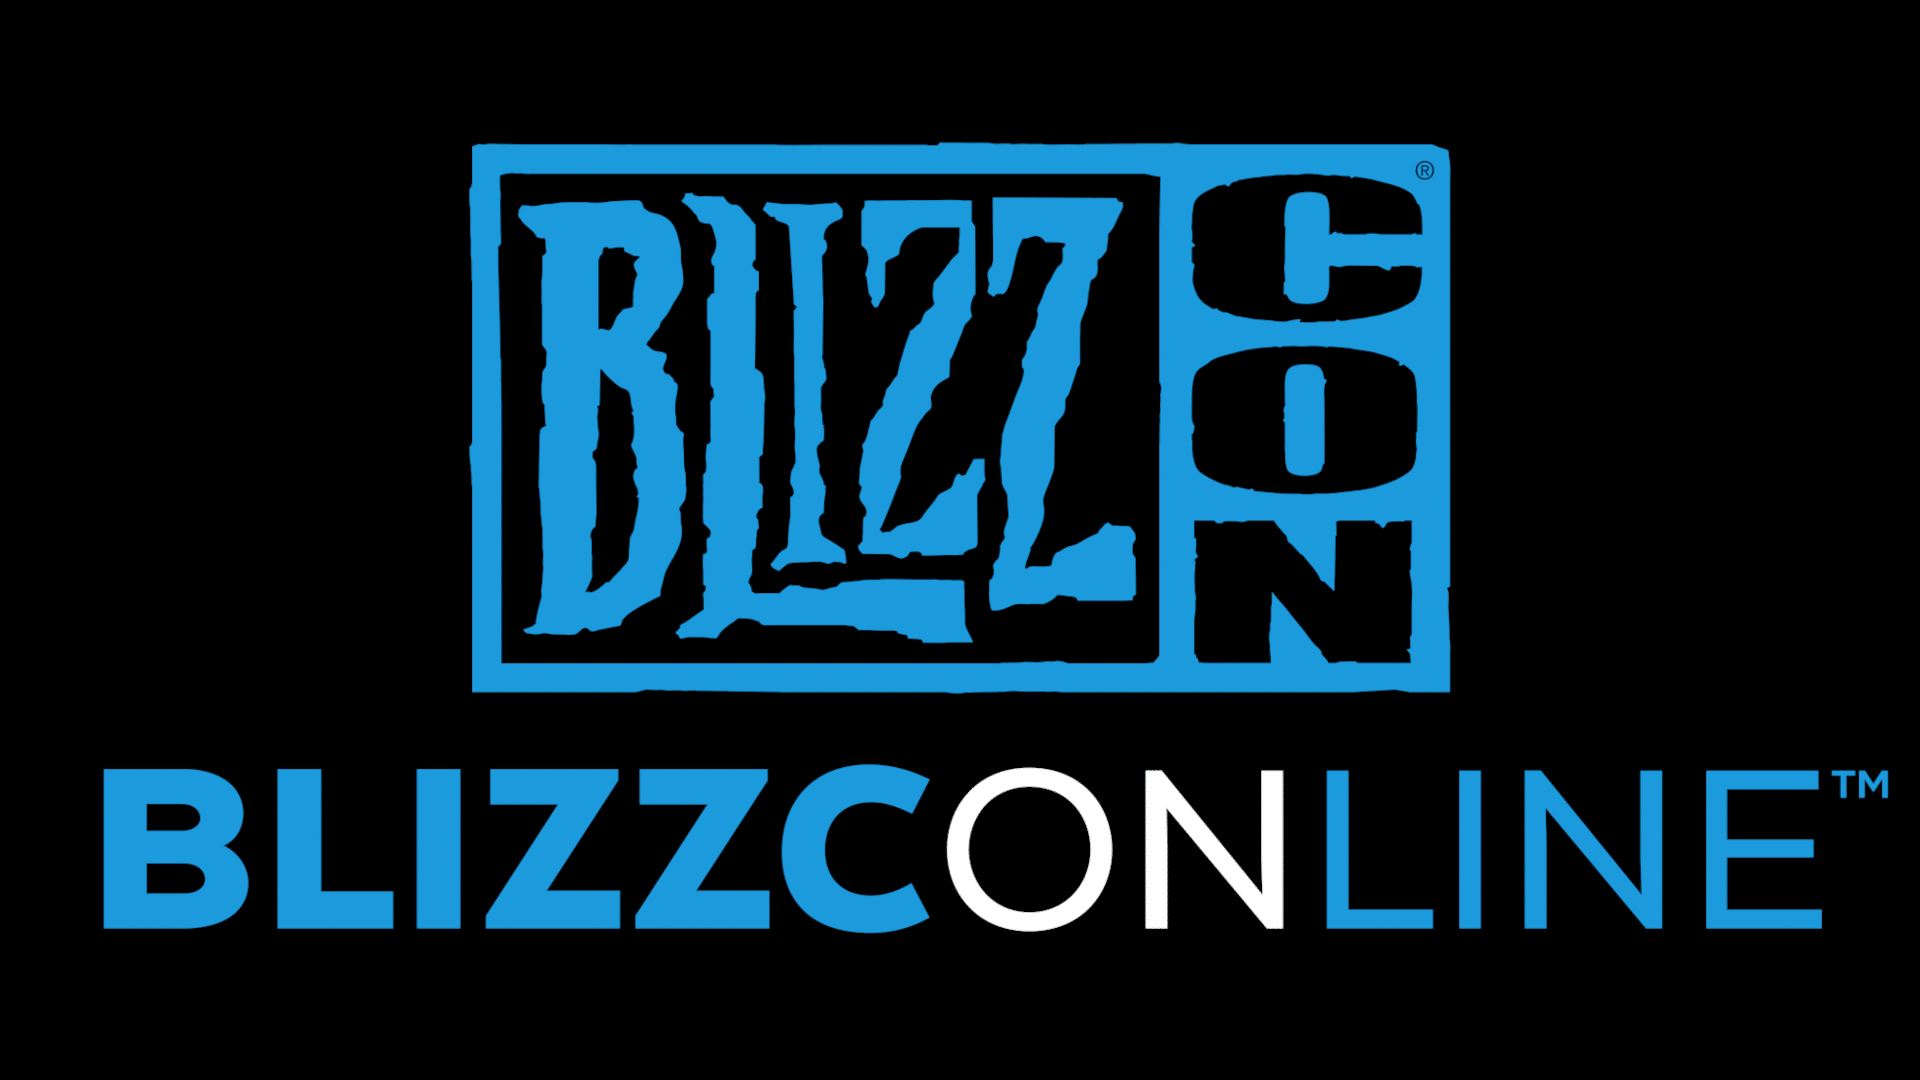 Blizzcon 2021 “BlizzConline” Will Be Free For Everyone